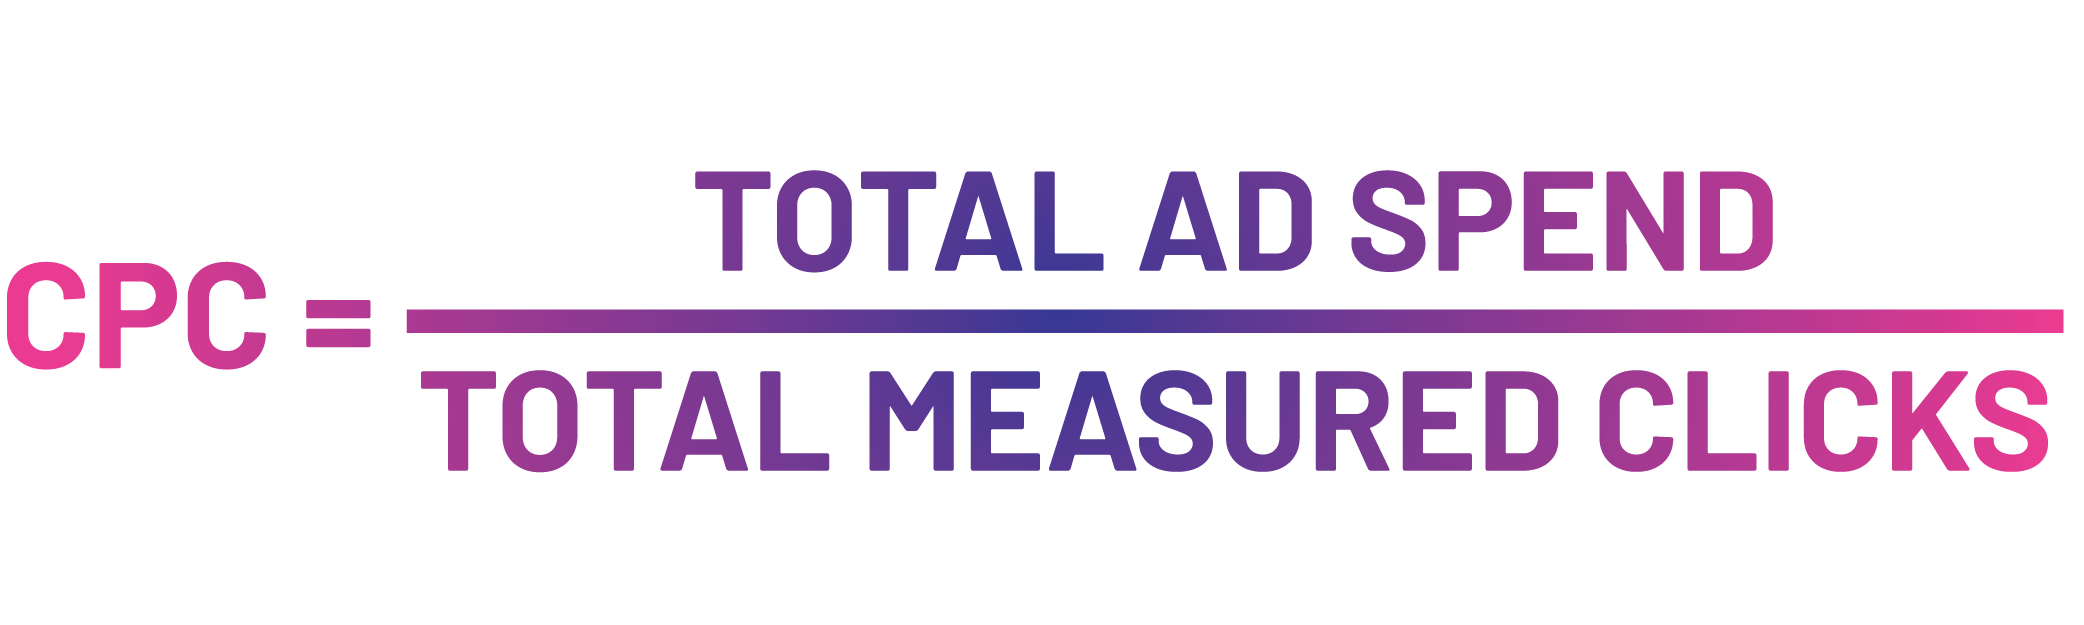 cpc | Total ads spend